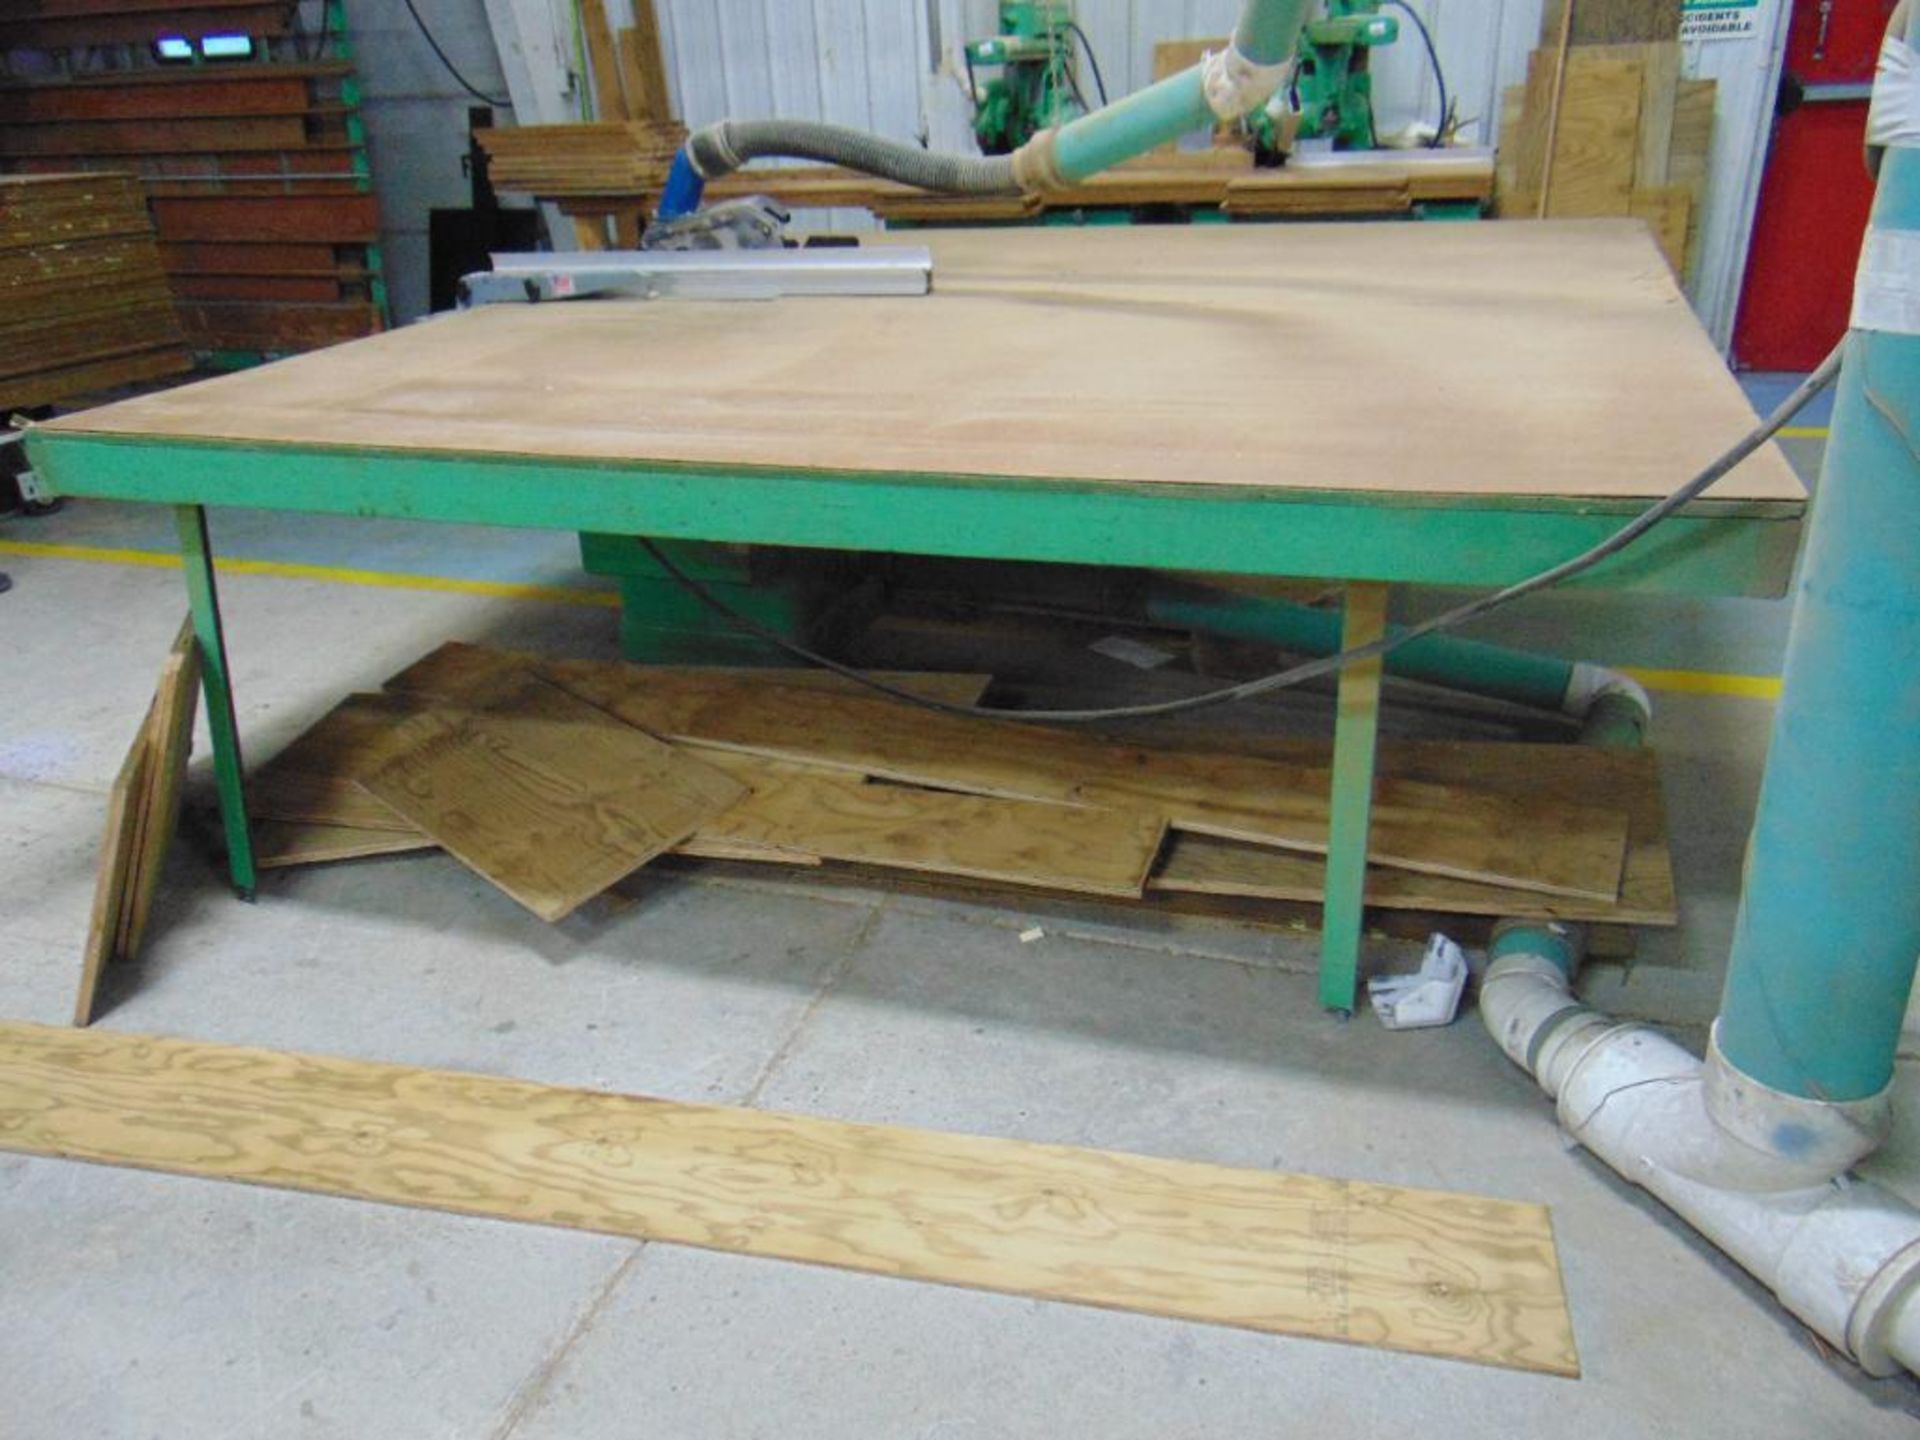 Delta Rockwell 10" Tablesaw - Image 4 of 7